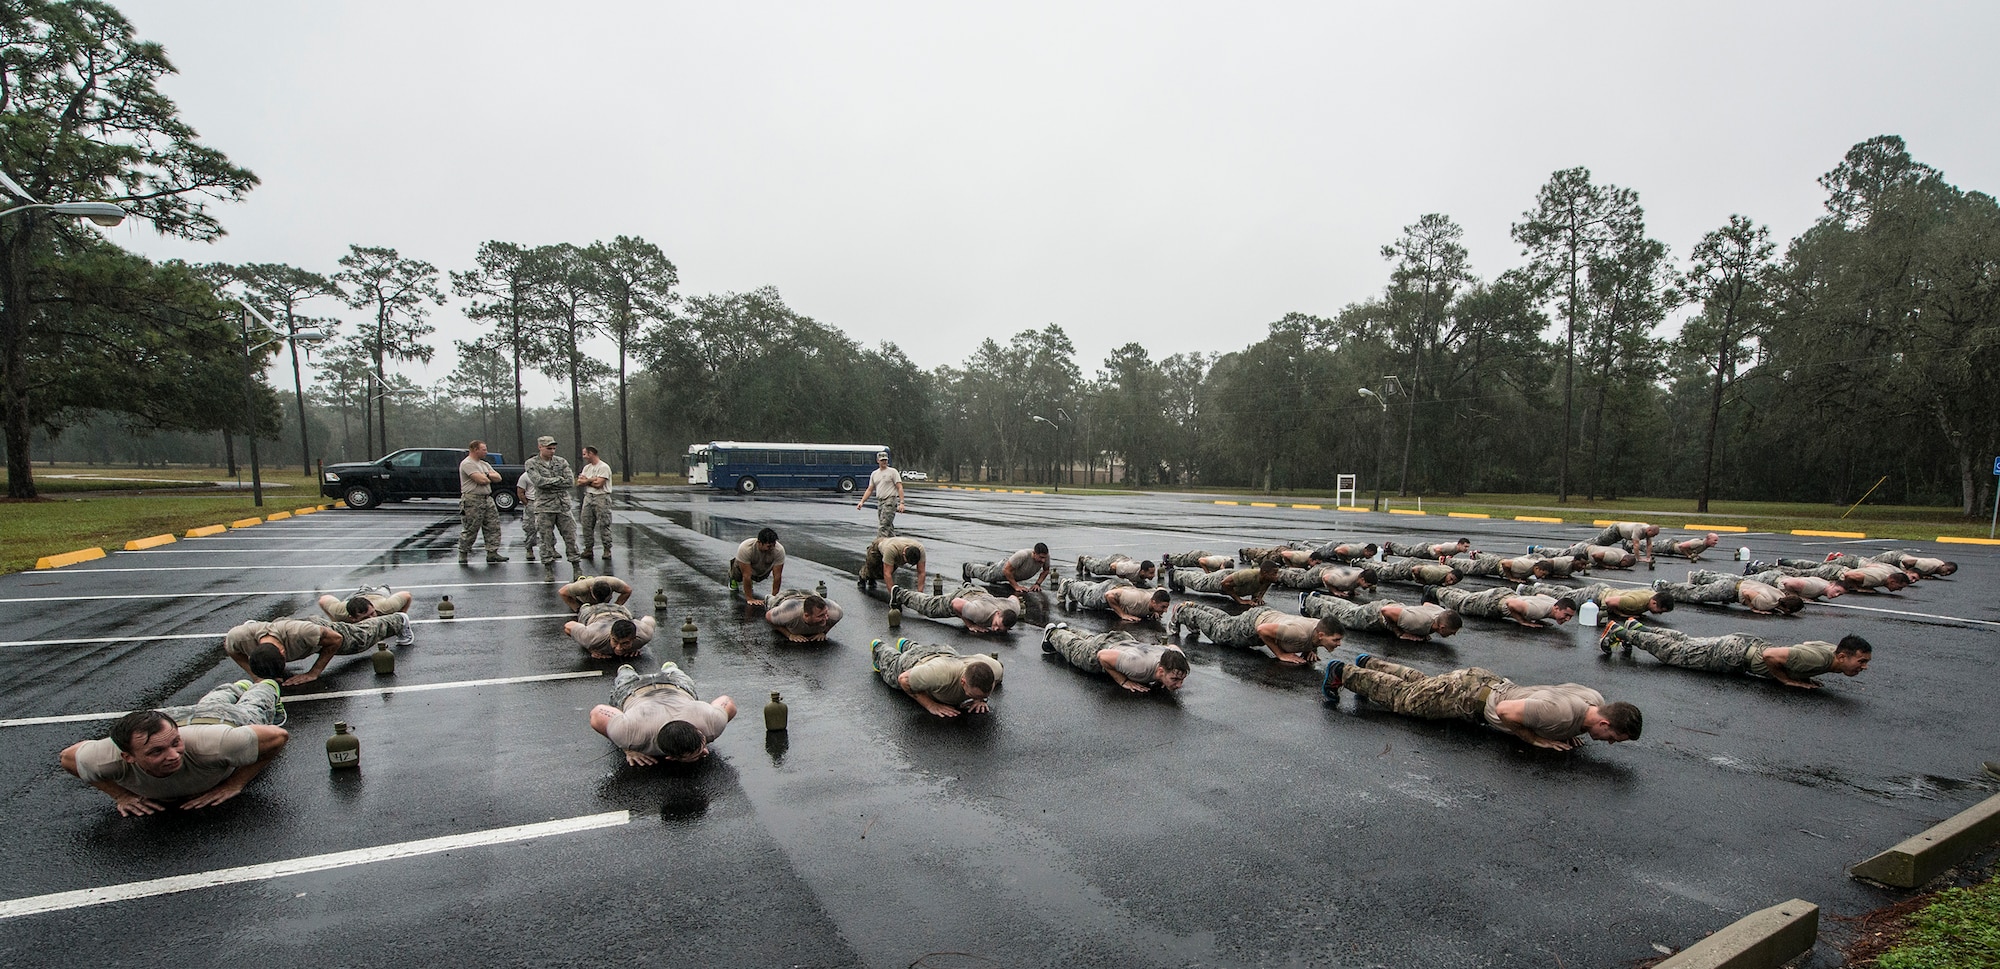 Airmen from the 820th Base Defense Group at Moody Air Force Base, Ga., and the 1st Special Operations Security Forces Squadron at Hurlburt Field, Fla., participate in remedial physical training, Dec. 15, 2015, at Camp Blanding, Fla. The training was used to push Airmen to their limits during a qualification assessment for Army Air Assault School. (U.S. Air Force photo by Airman 1st Class Lauren M. Johnson/Released)